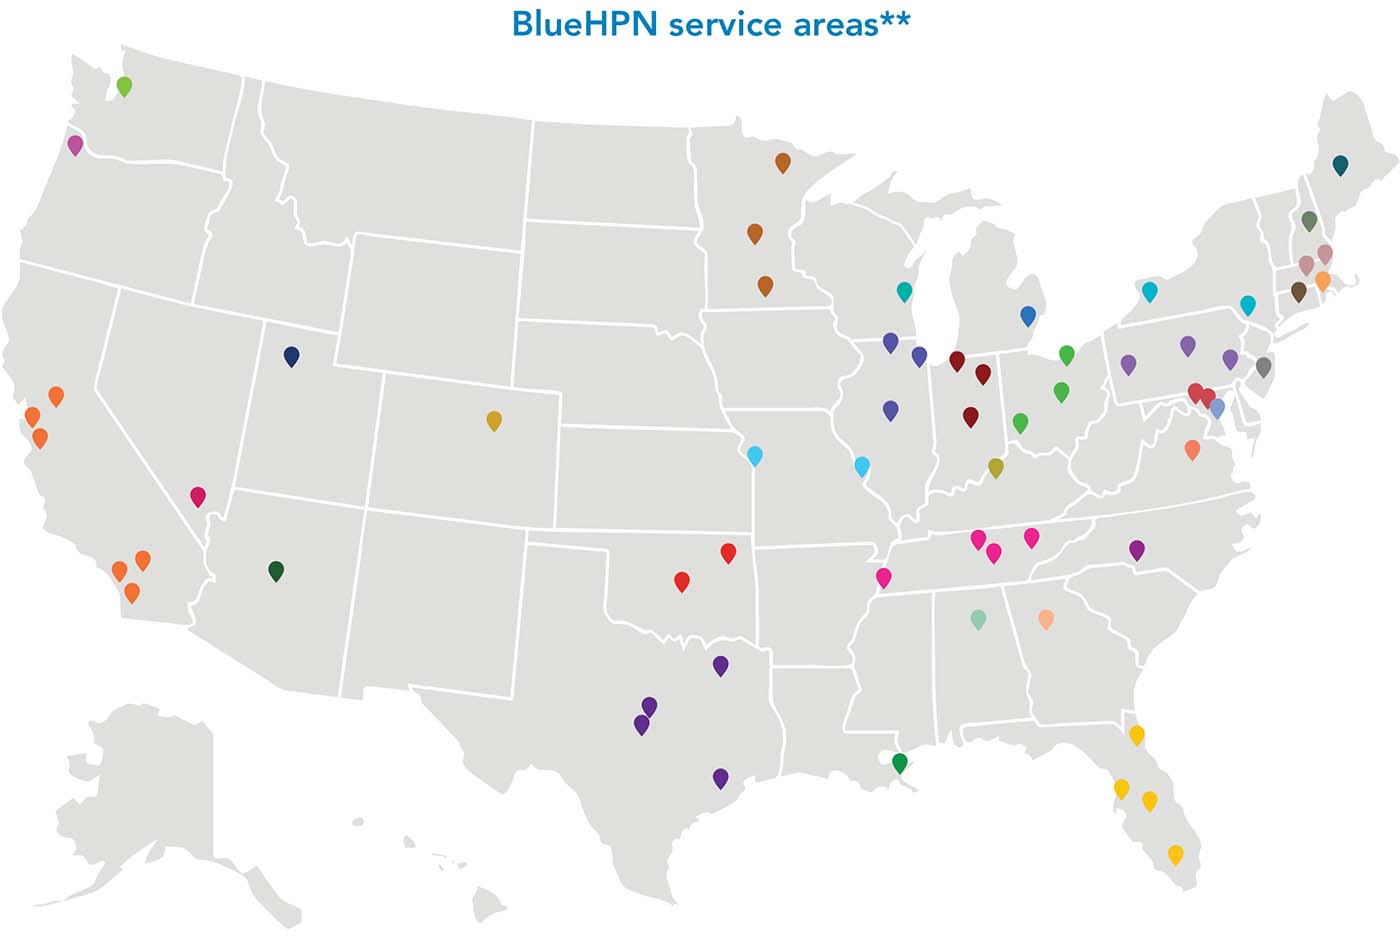 The BlueHPN service area map with legal mark double asterisk